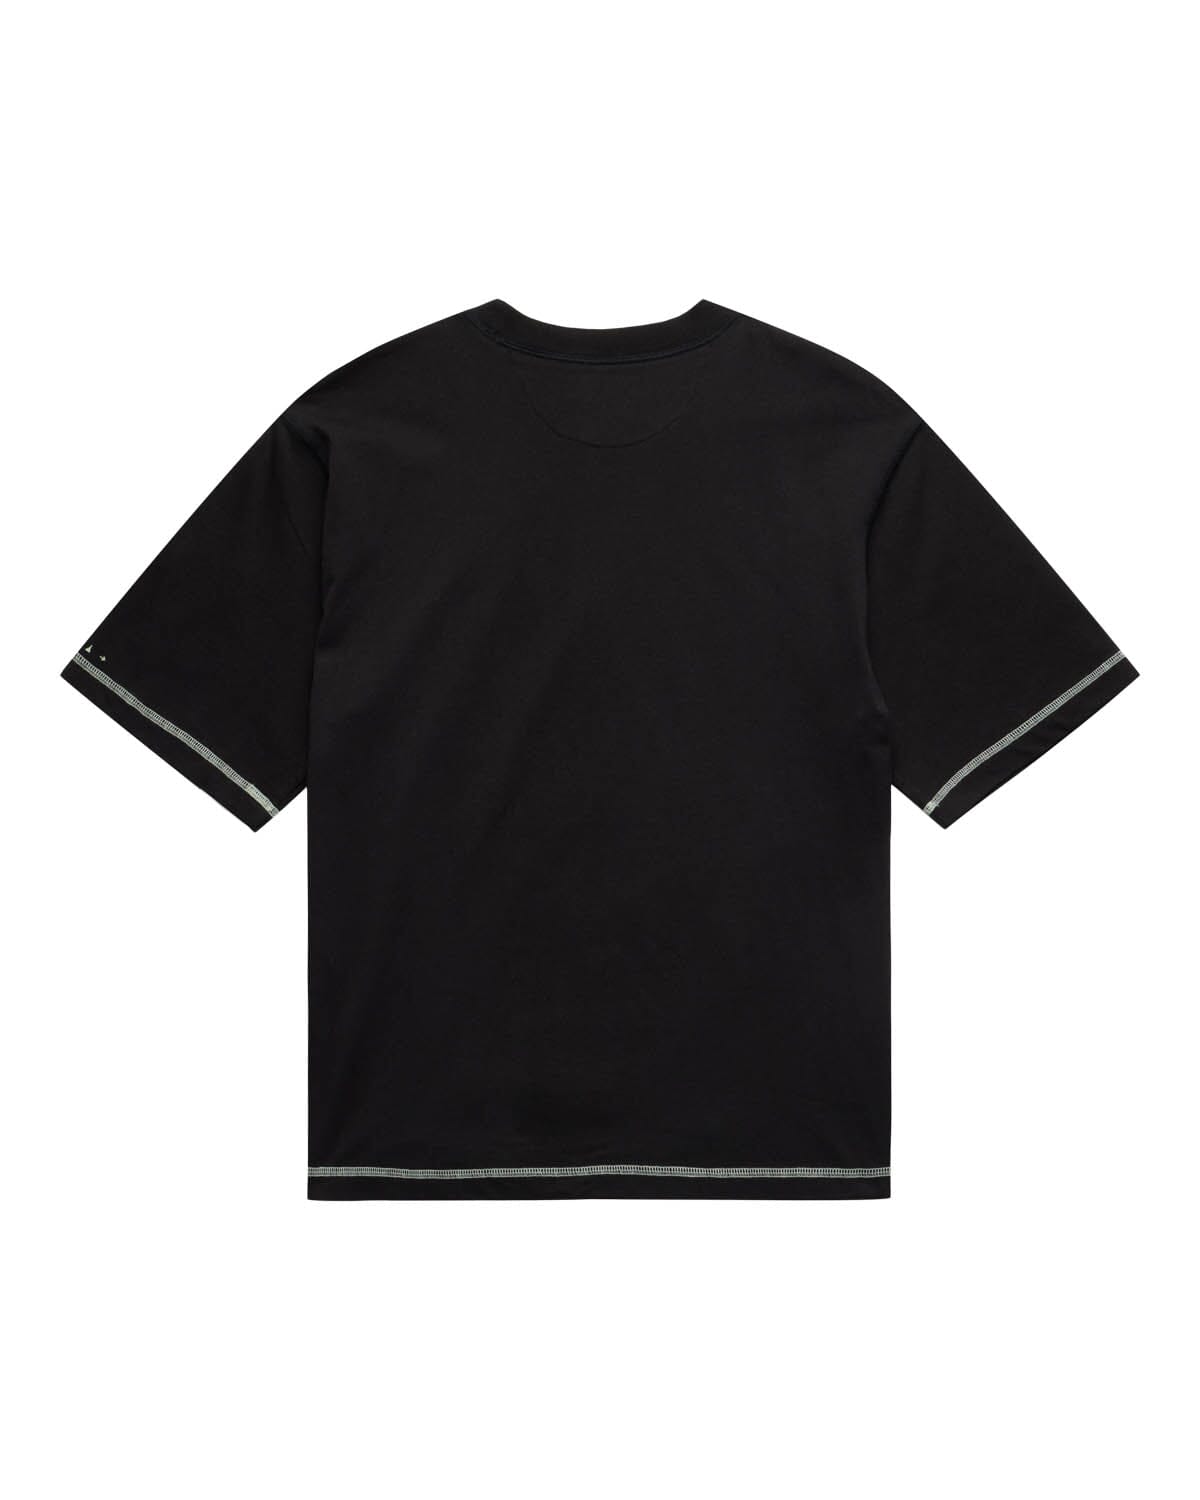 ST STATIC SS CREW SHIRT BLK TEE ST STATIC 